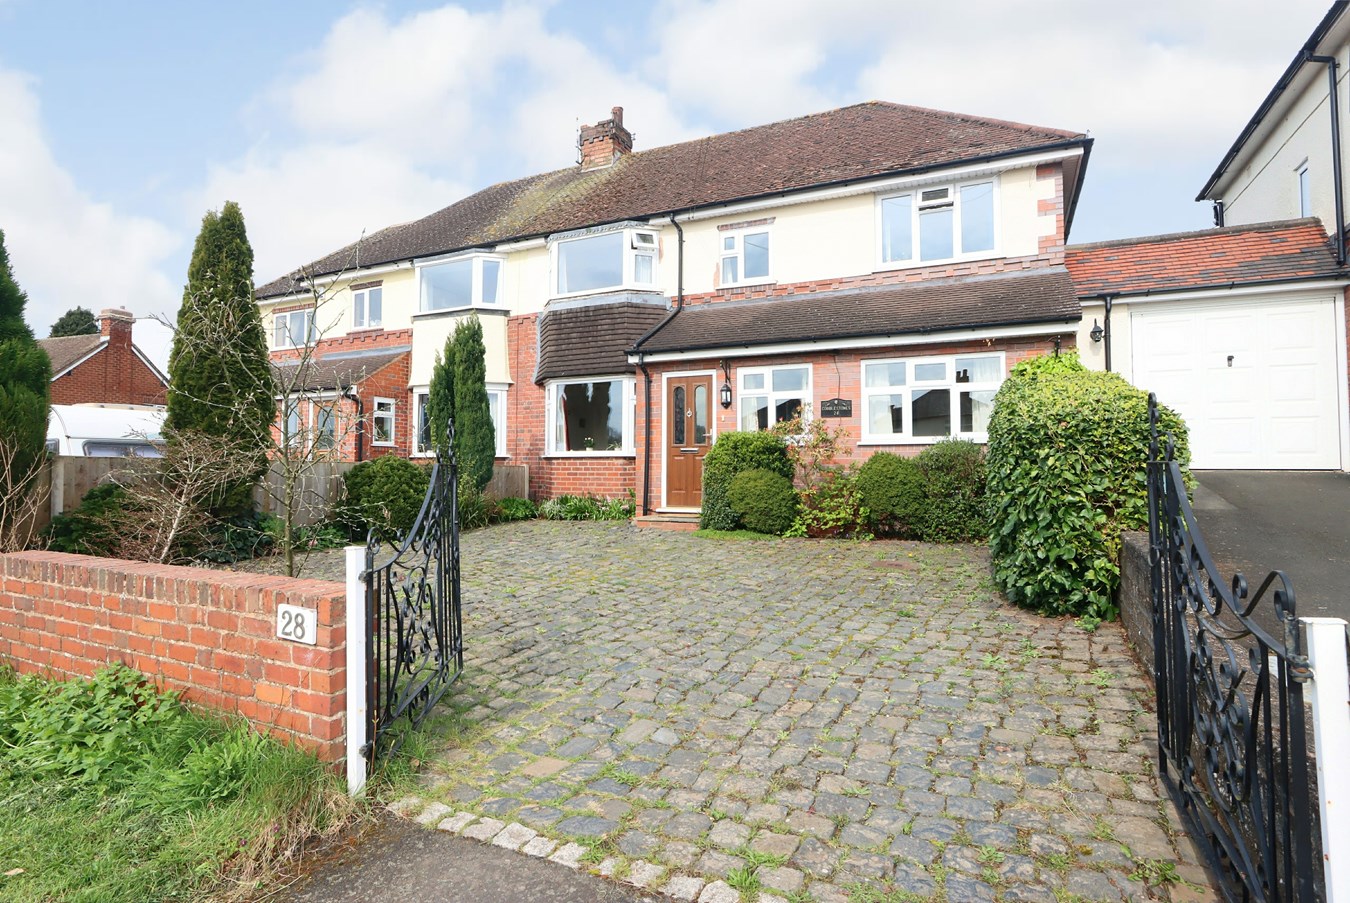 Franche Road, Wolverley, Kidderminster, DY11